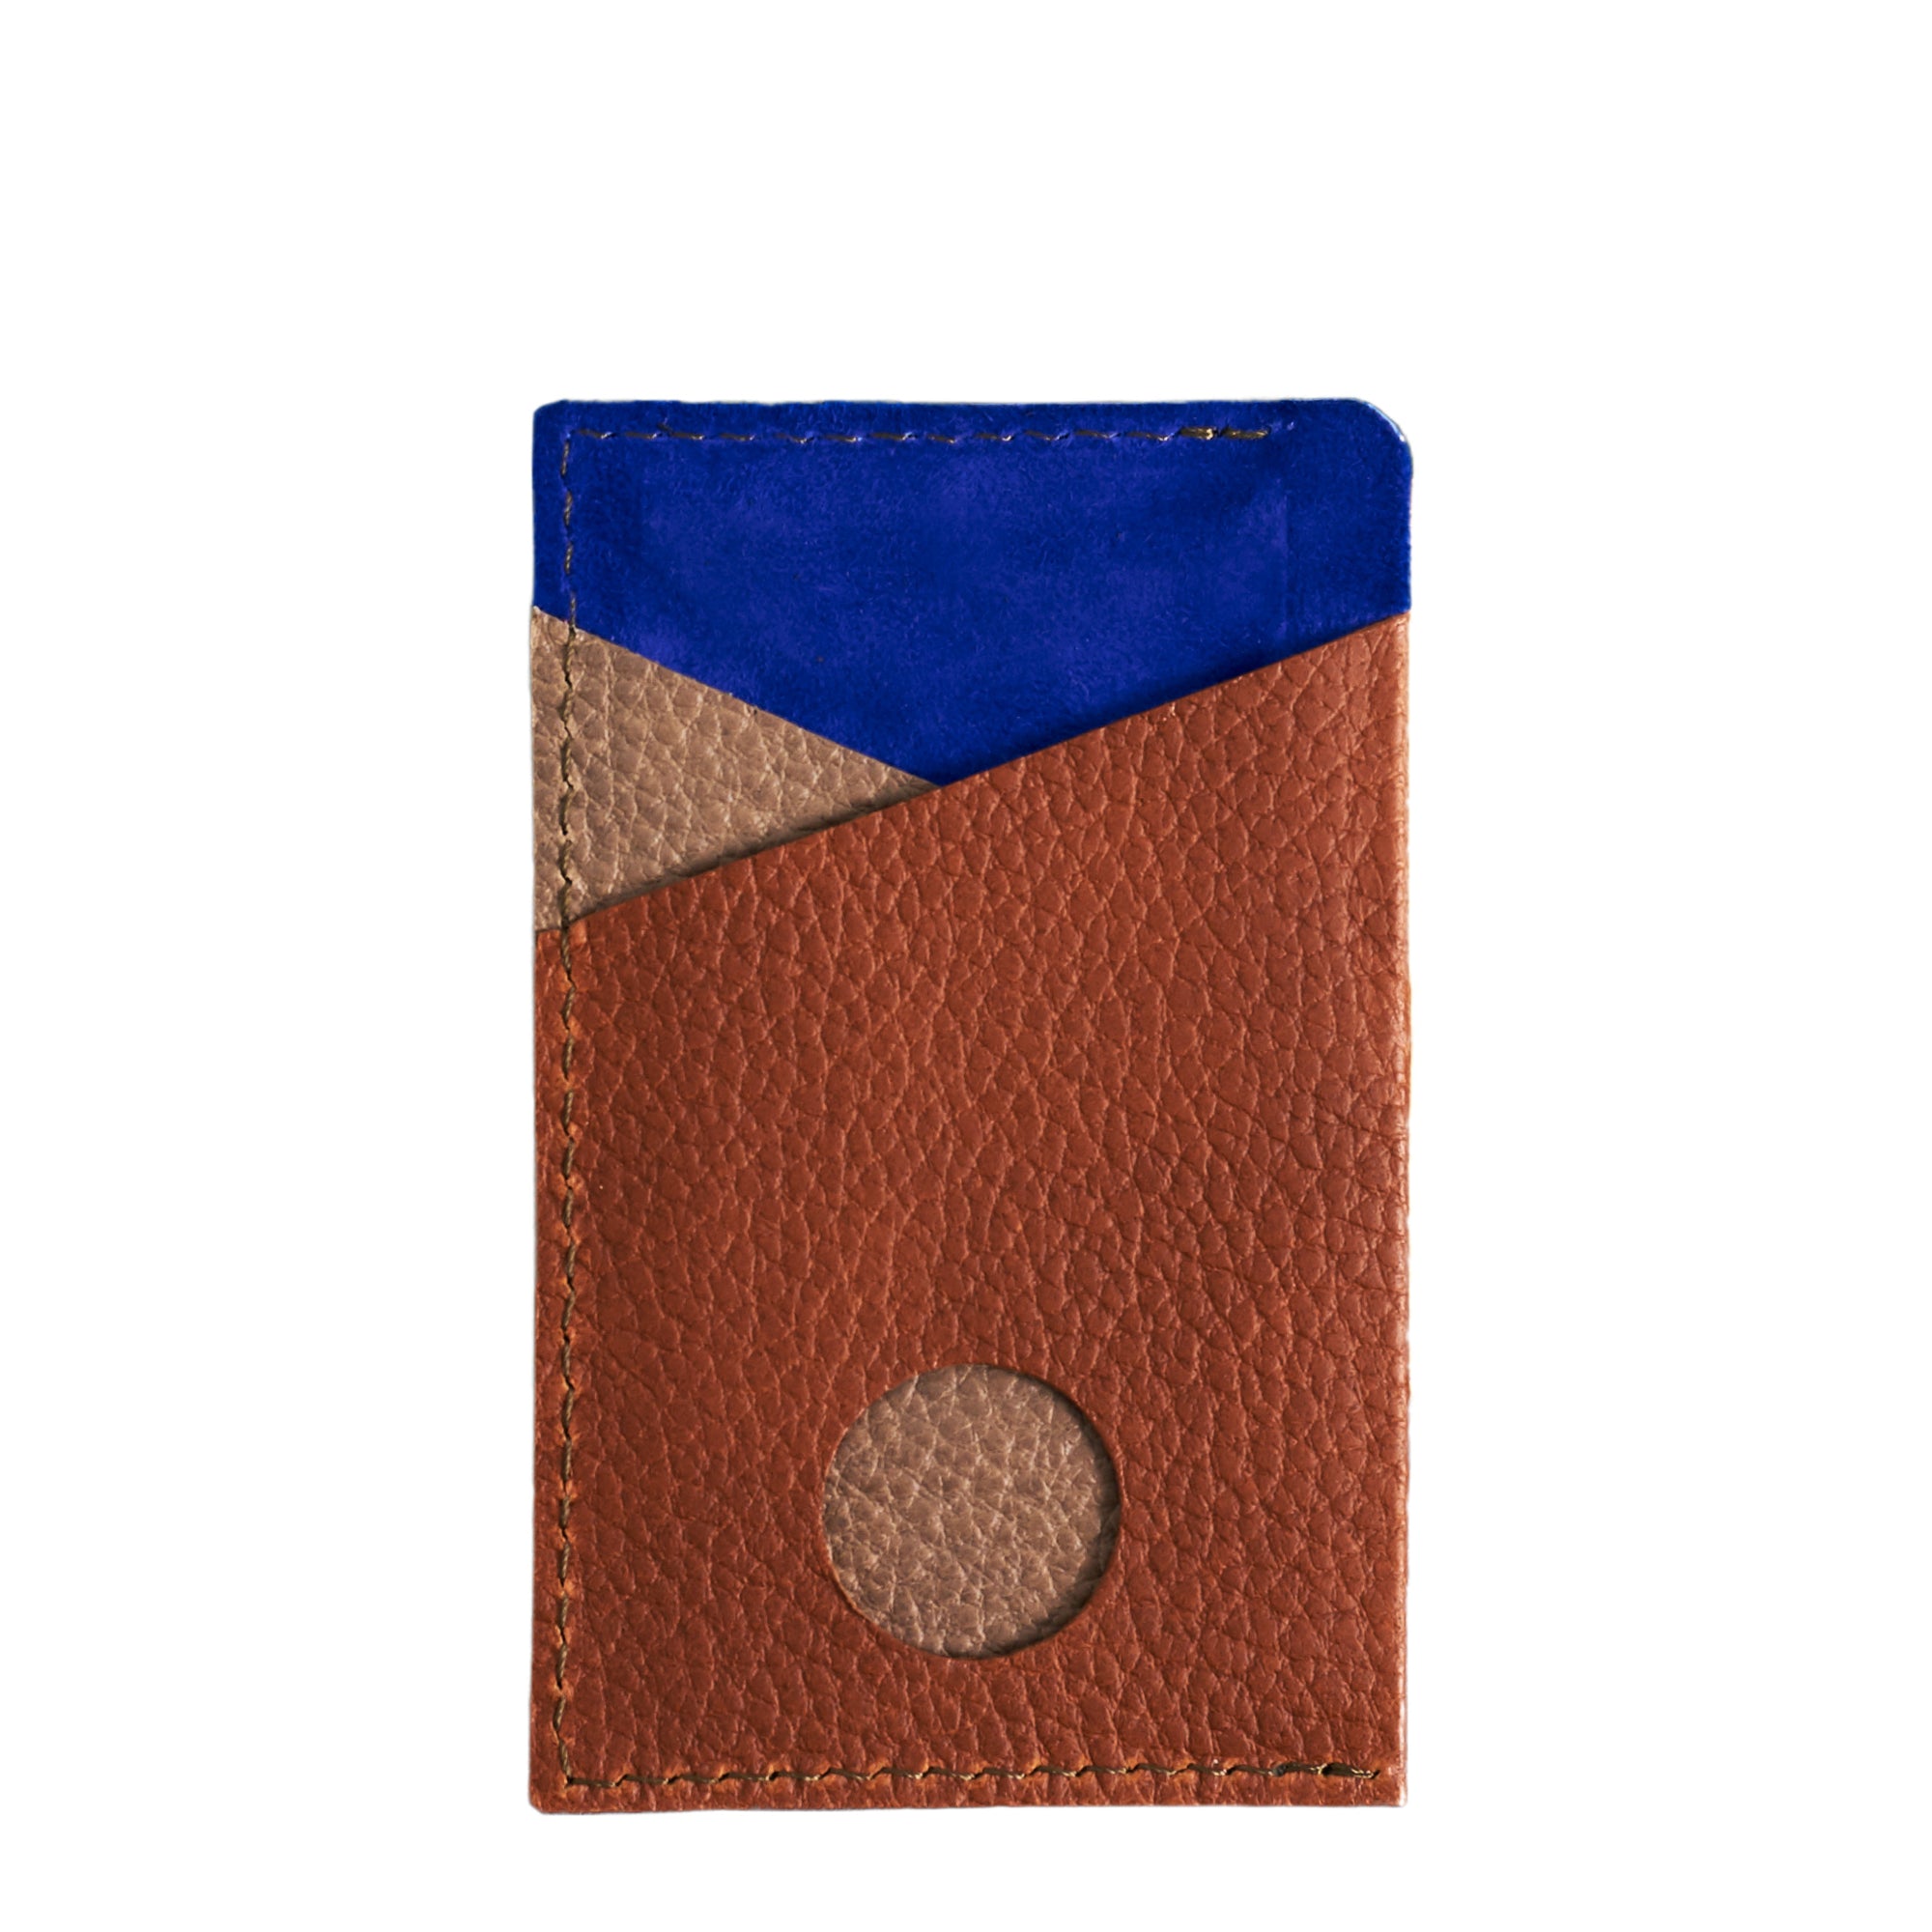 Back Cover. Card Holder Wallet Remix by Capra Leather